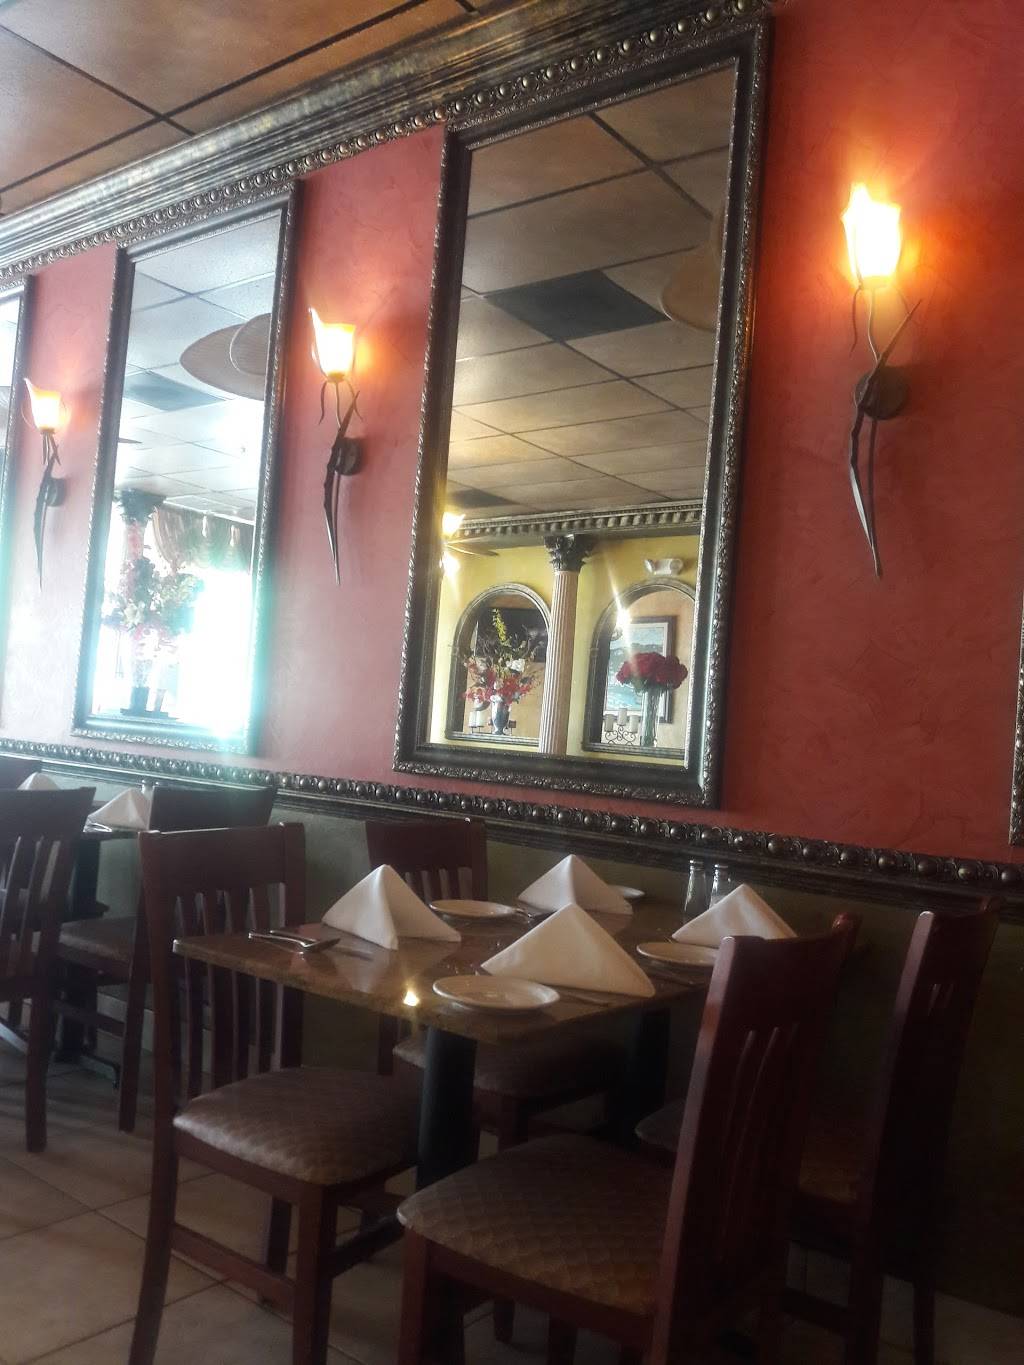 Italian Kitchen Grill and Cafe | restaurant | 6915 US-301, Riverview, FL 33578, USA | 8136710953 OR +1 813-671-0953